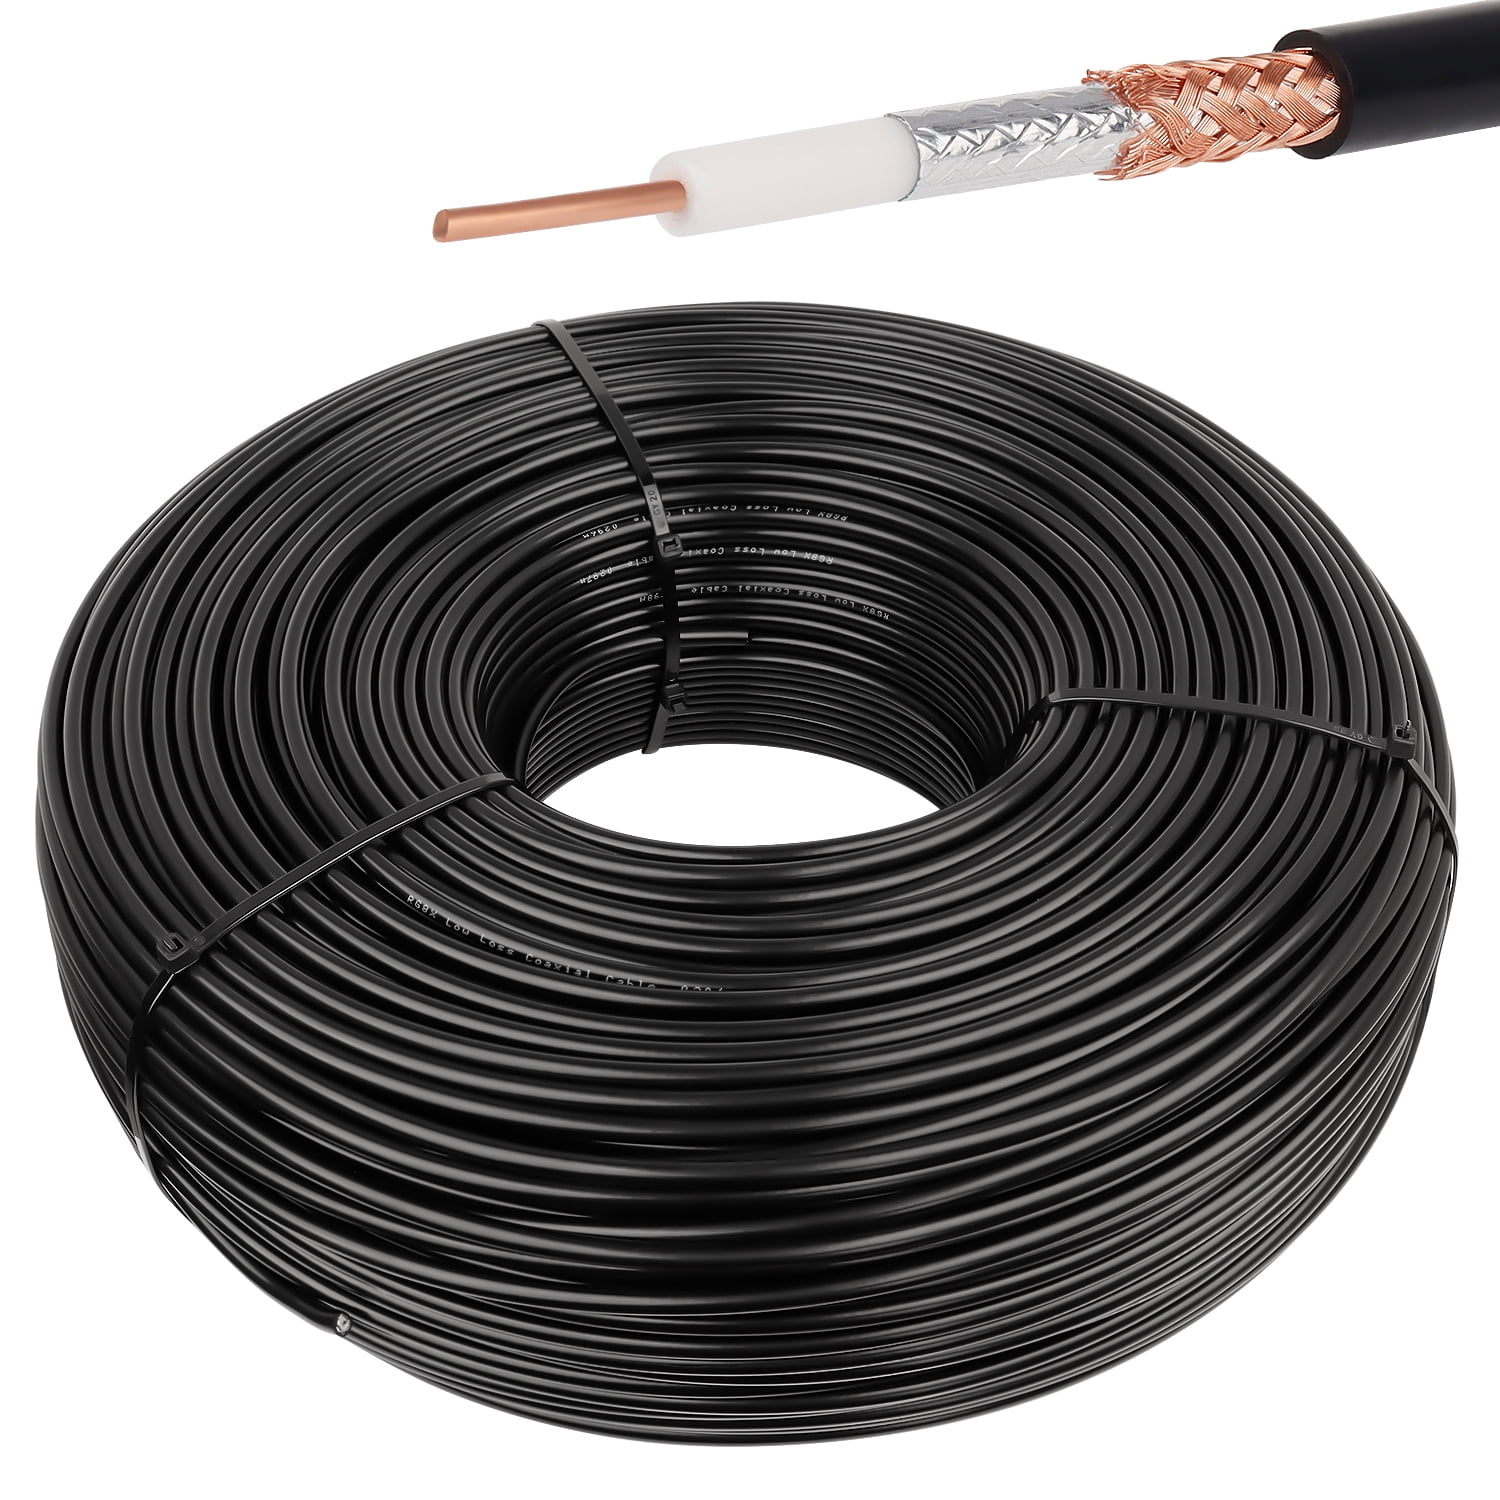 Extension Antenna RF 50 Ohm 100ft, Router Cable for Cable Wired Coax Network Low Pigtail Impedance Cable 4G RG8X Cable Flexible Black RG8X Coaxial Loss MOOKEERF Wireless &